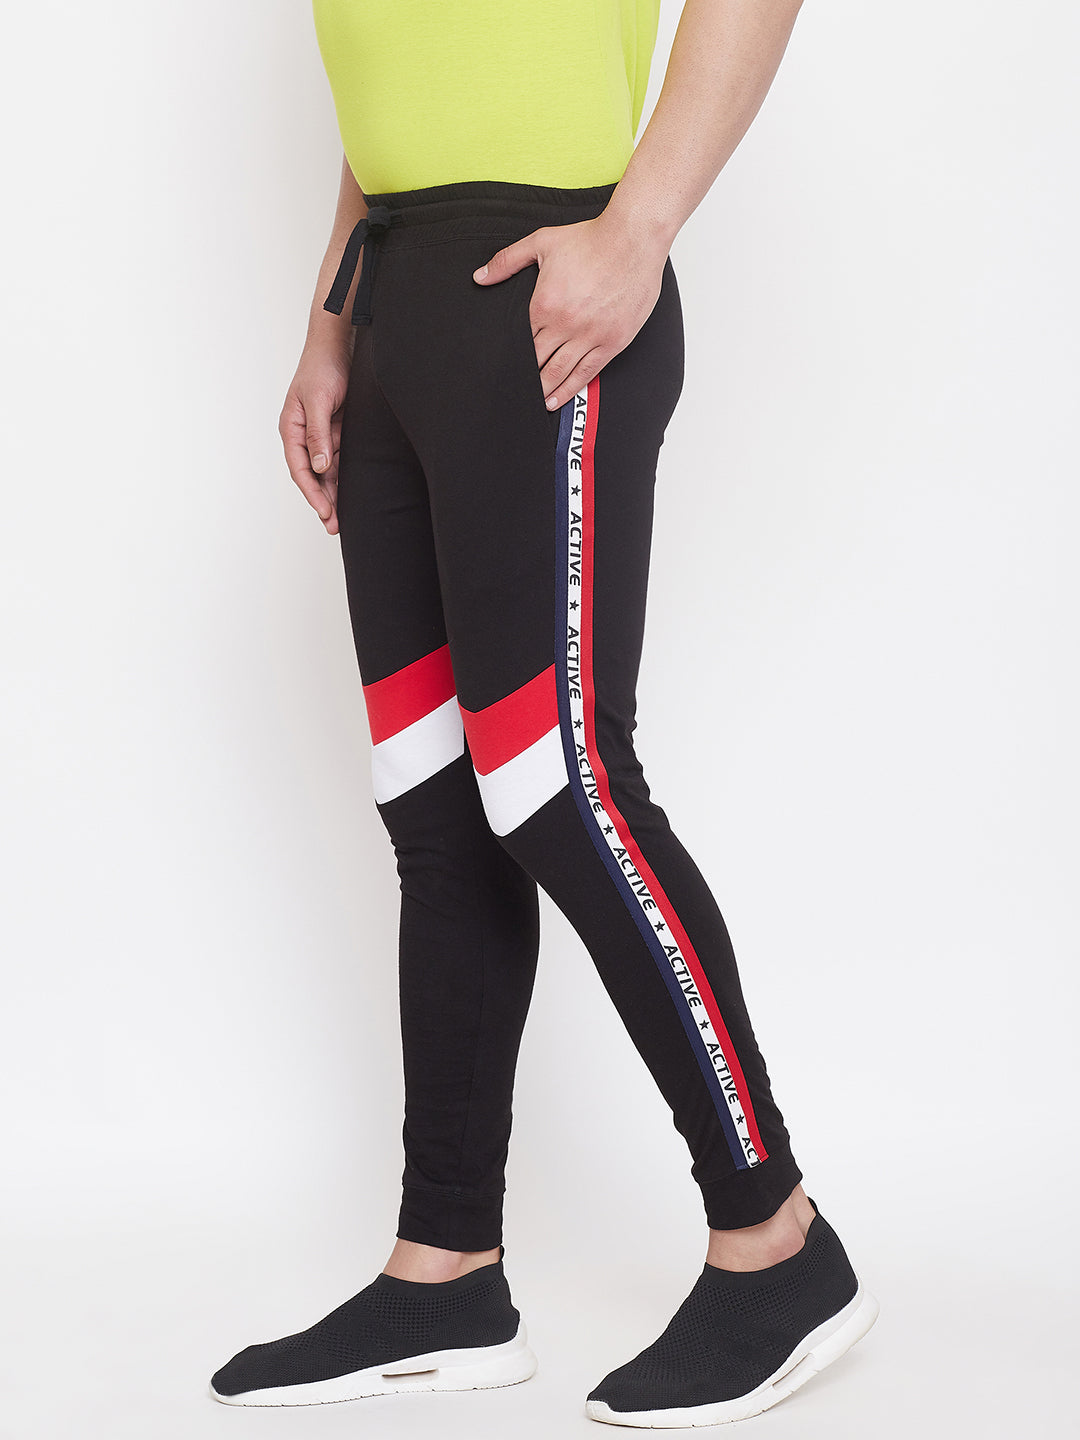 Black/Red/White Men'S Slim Fit Joggers With Color Block Side Taping